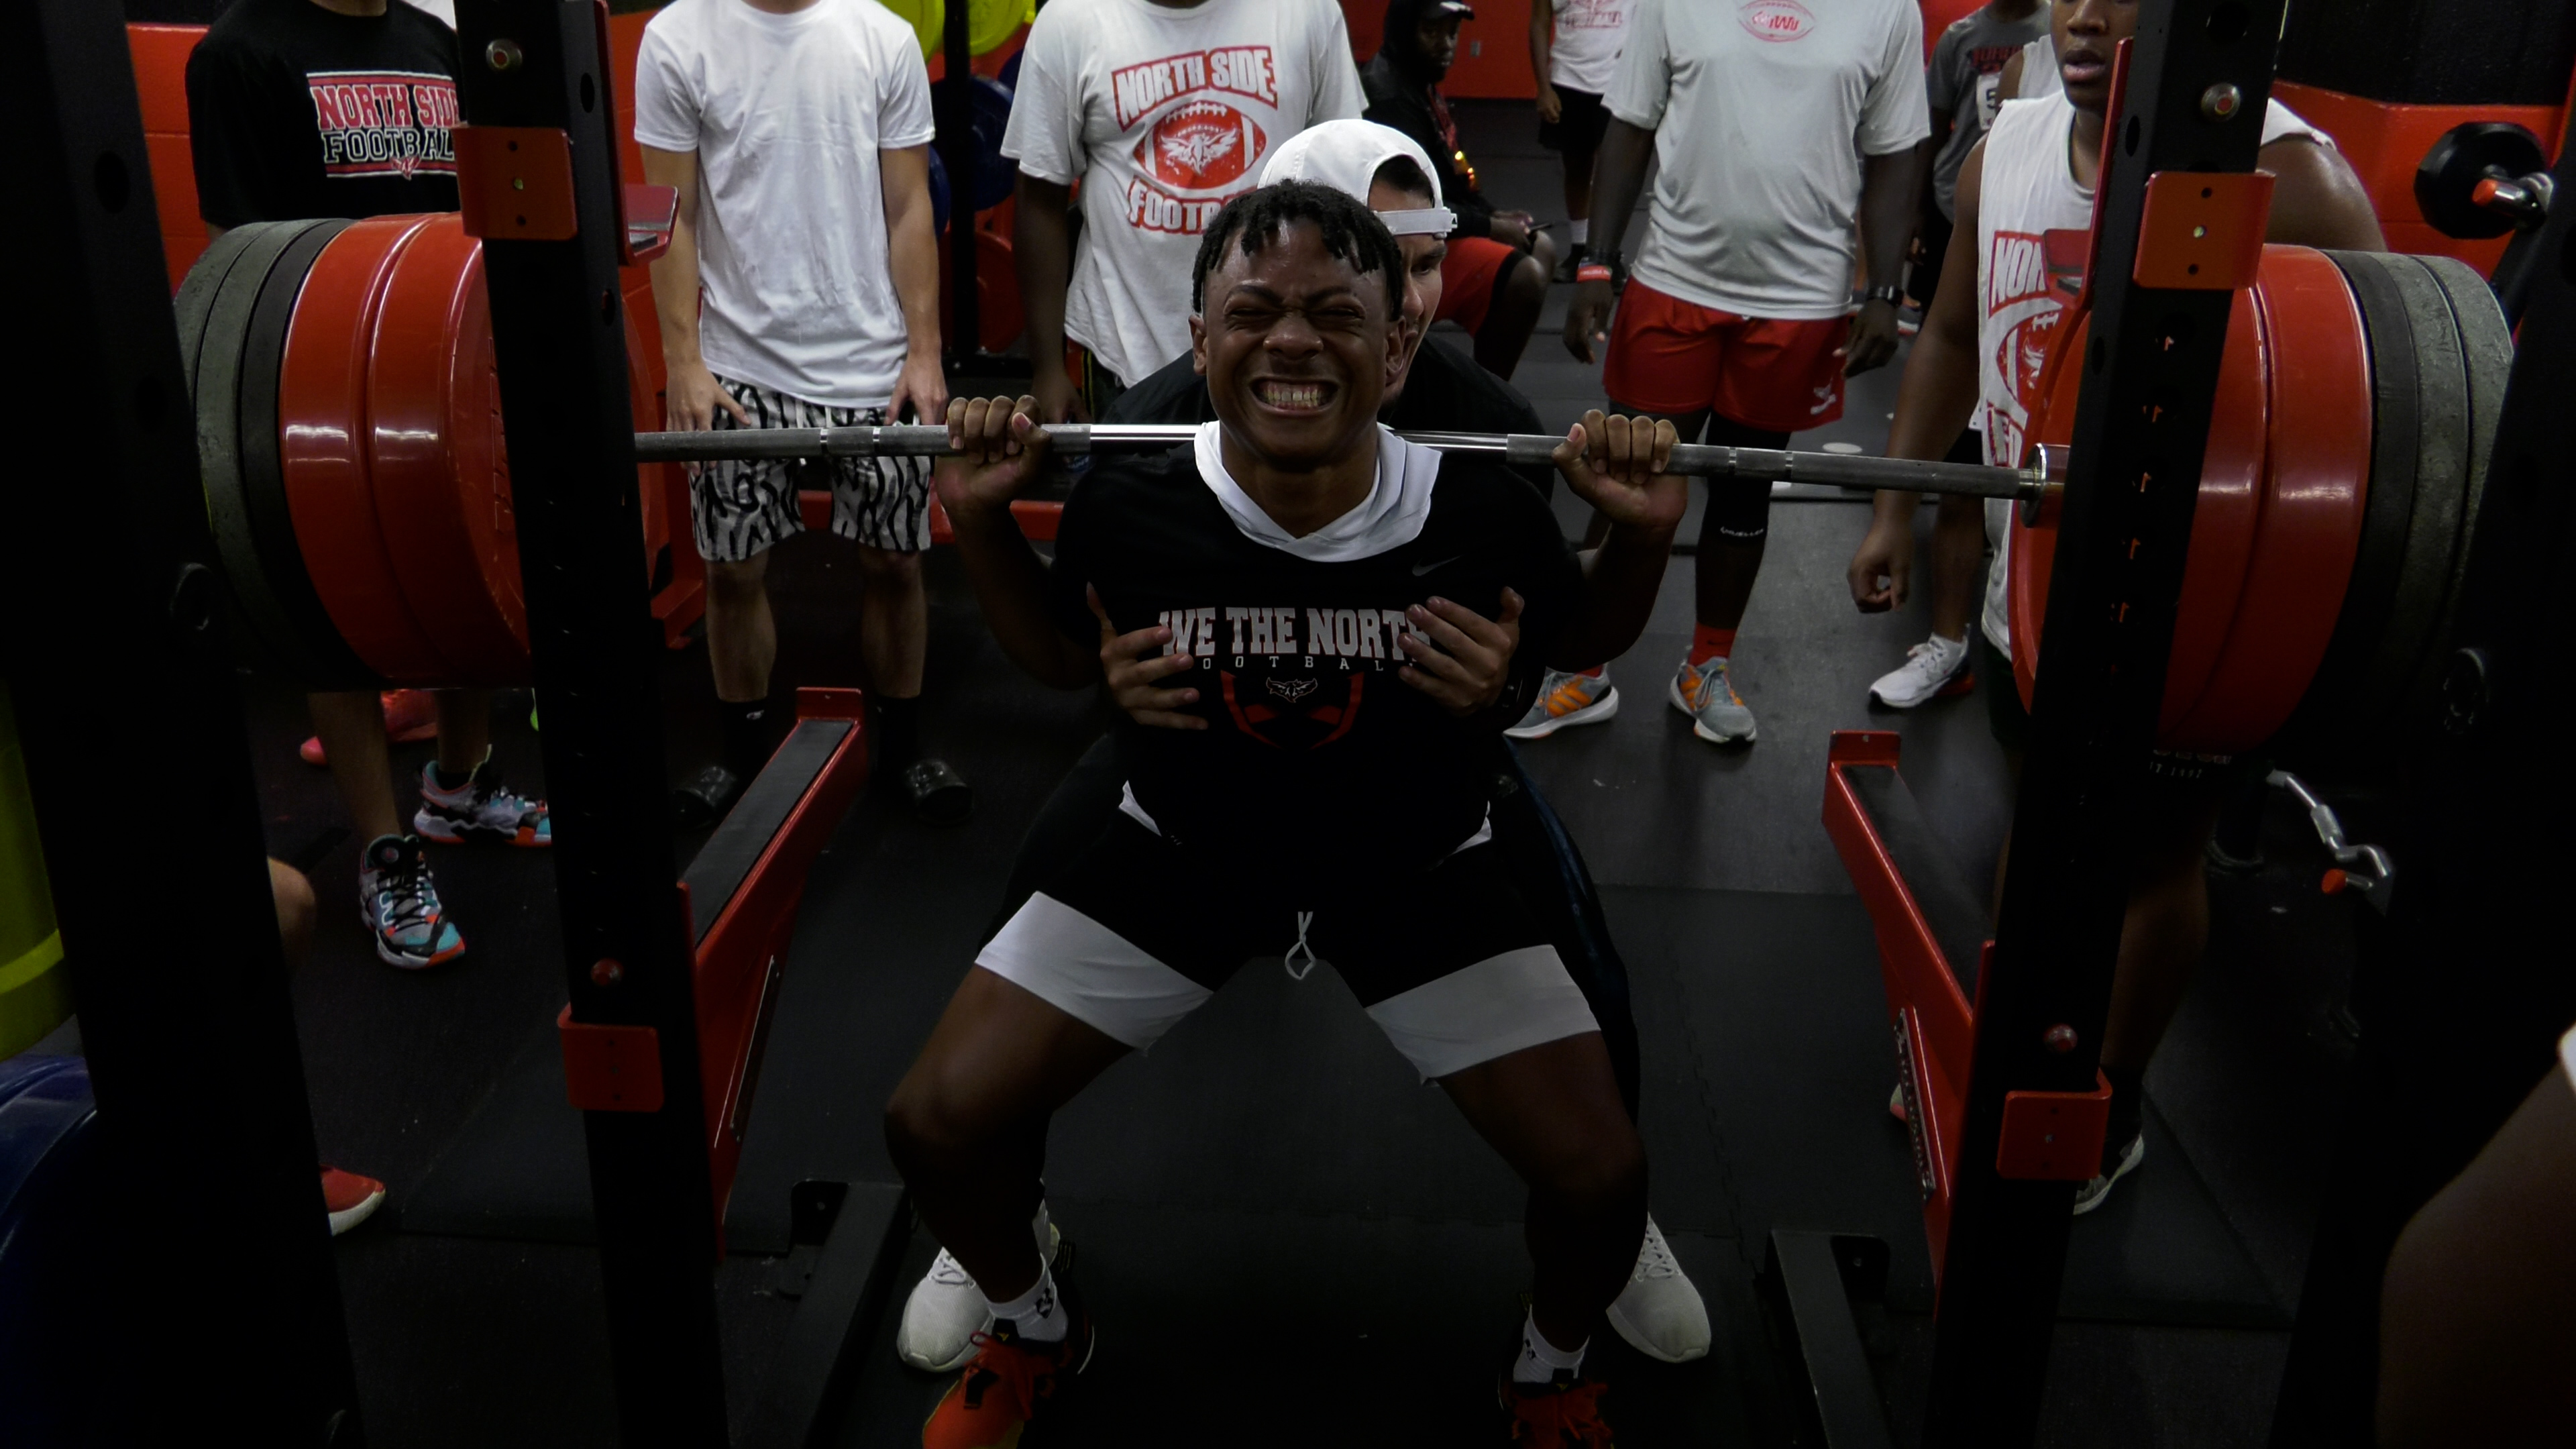 North Side athletes take part in strength & conditioning combine